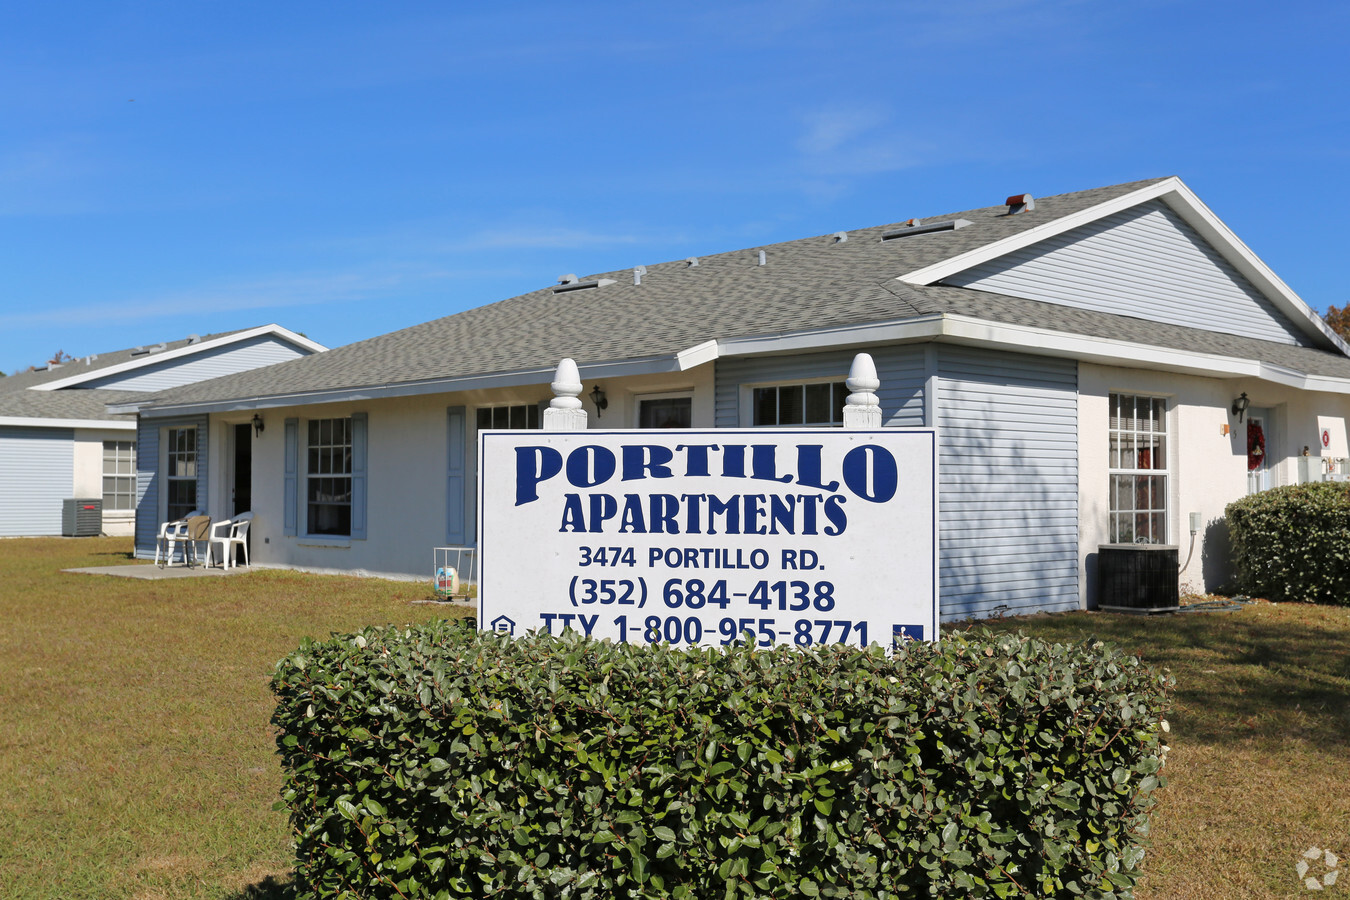 Portillo Apartments Affordable Rental Housing in Spring Hill, Fl 